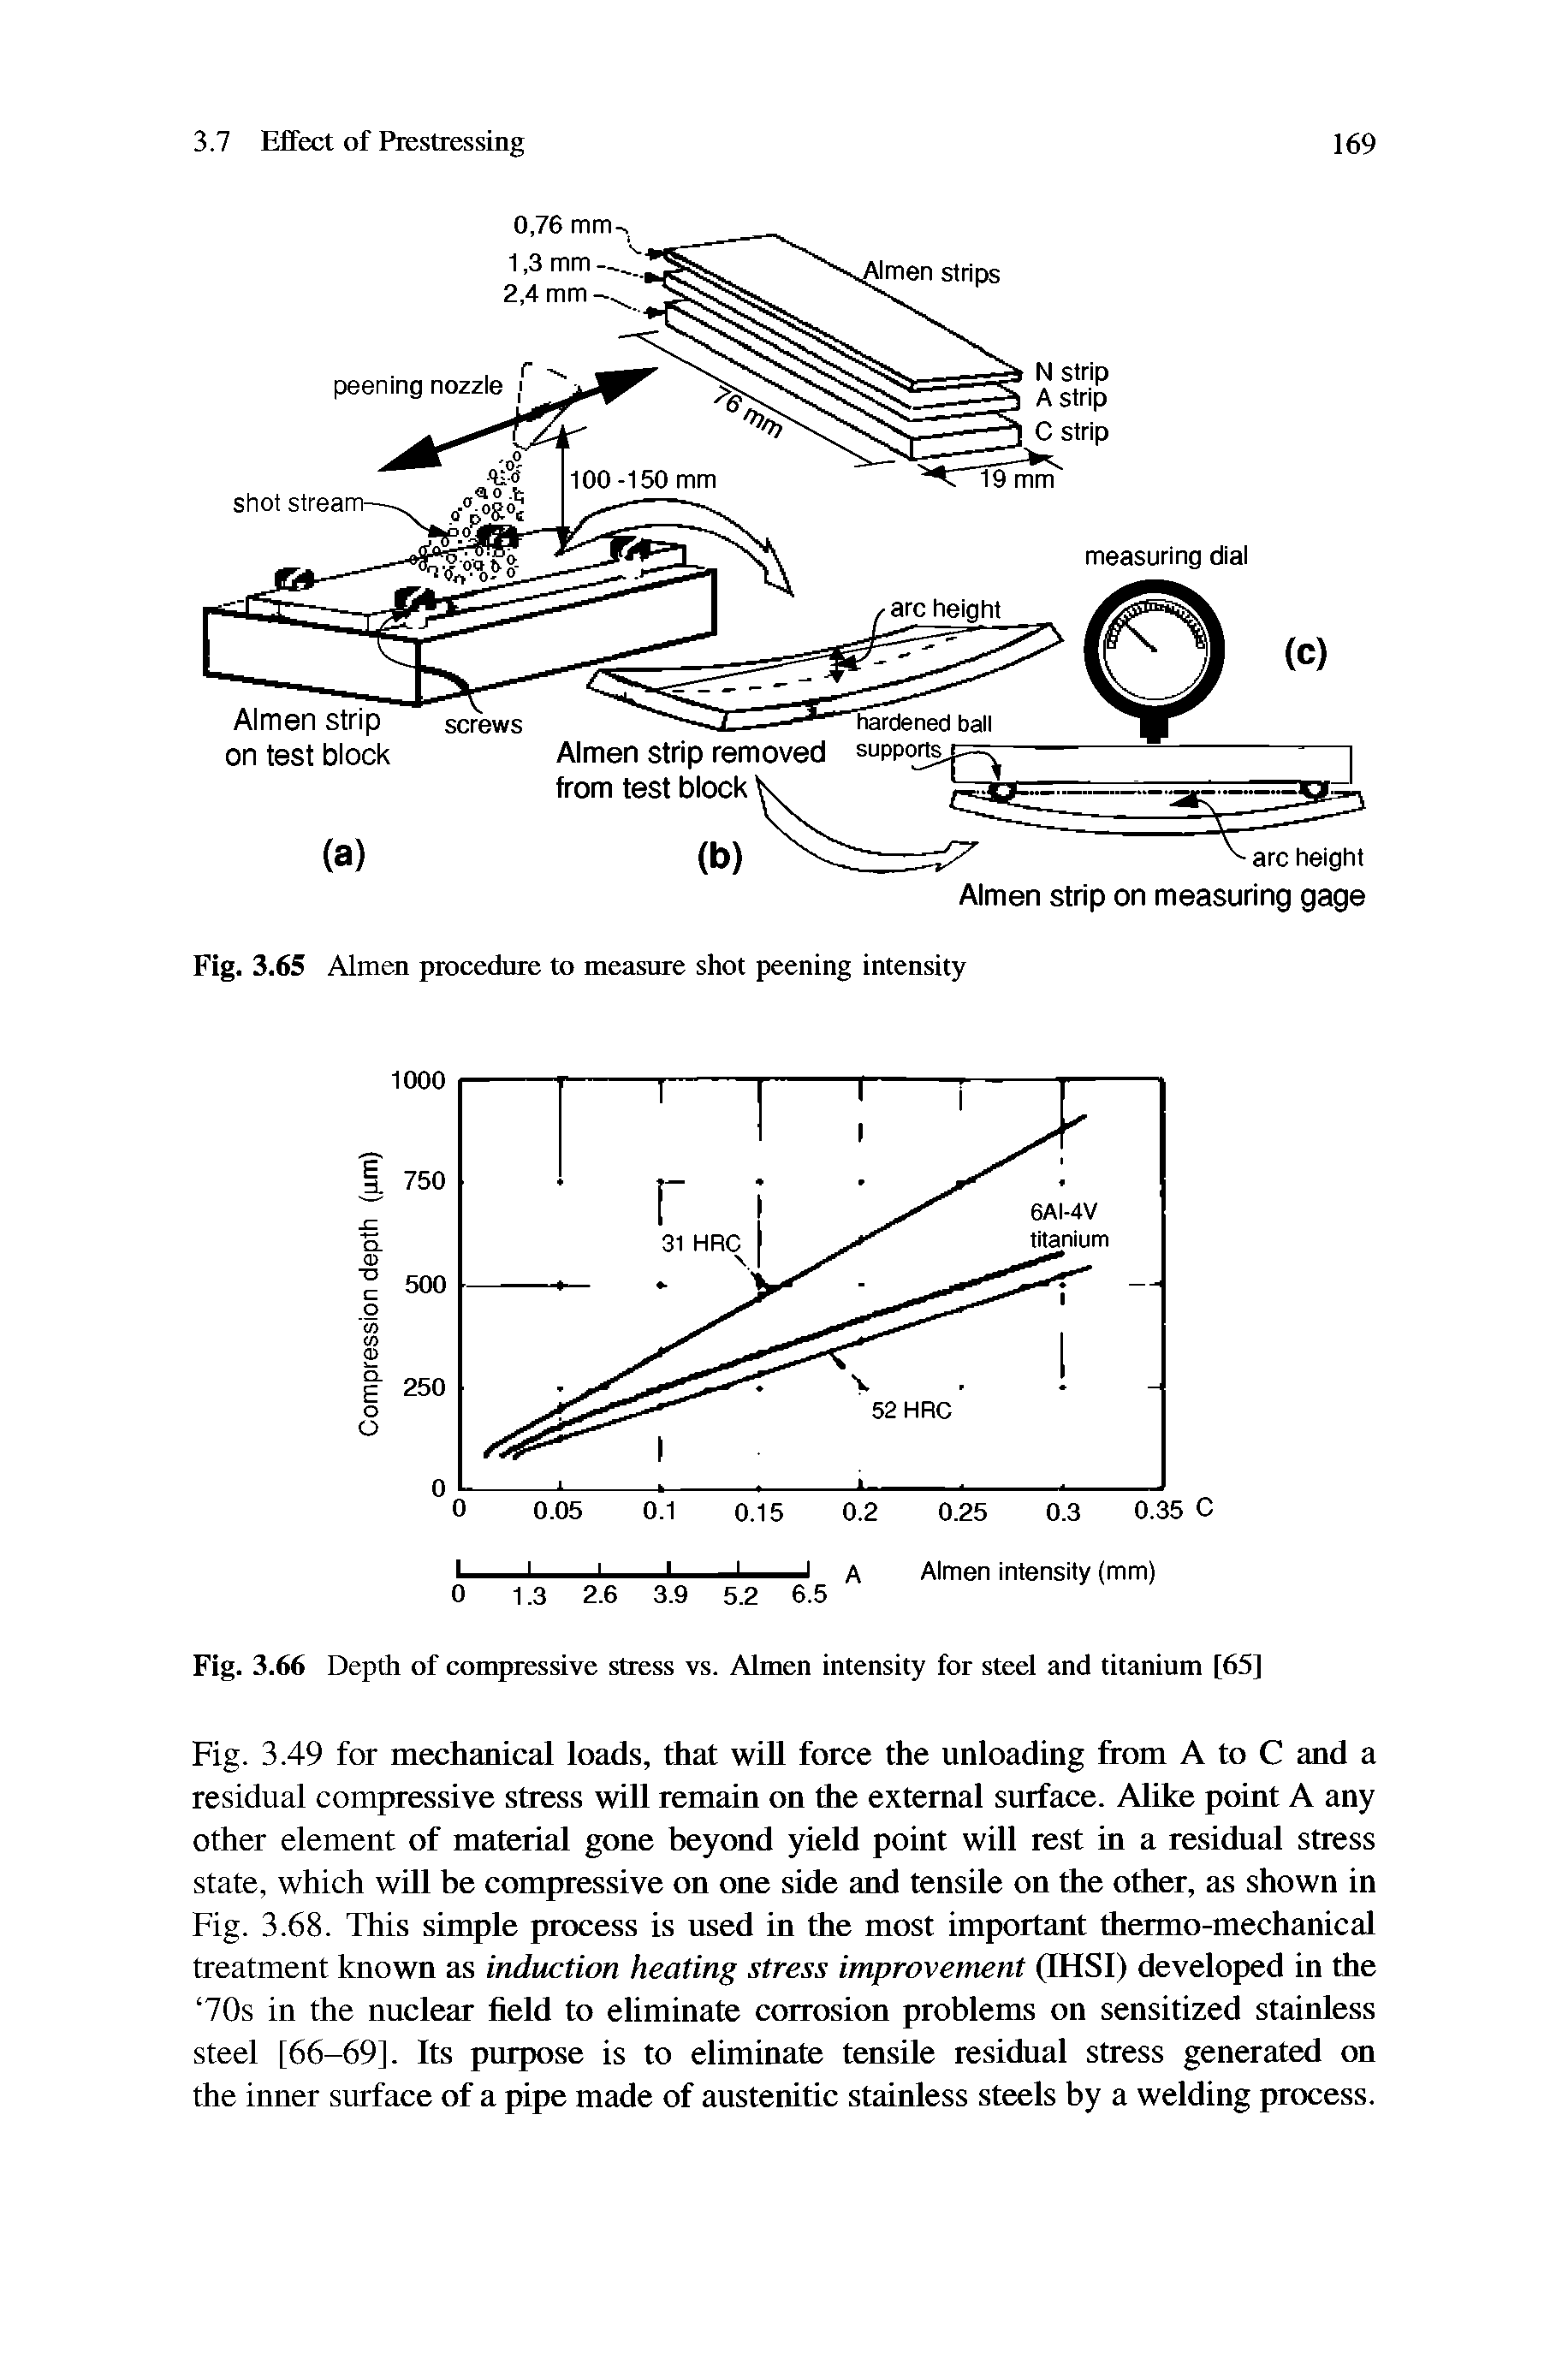 Fig. 3.49 for mechanical loads, that will force the unloading from A to C and a residual compressive stress will remain on the external surface. Alike point A any other element of material gone beyond yield point will rest in a residual stress state, which will be compressive on one side and tensile on the other, as shown in Fig. 3.68. This simple process is used in the most important thermo-mechanical treatment known as induction heating stress improvement (IHSl) developed in the 70s in the nuclear field to eliminate corrosion problems on sensitized stainless steel [66-69]. Its purpose is to eliminate tensile residual stress generated on the inner surface of a pipe made of austenitic stainless steels by a welding process.